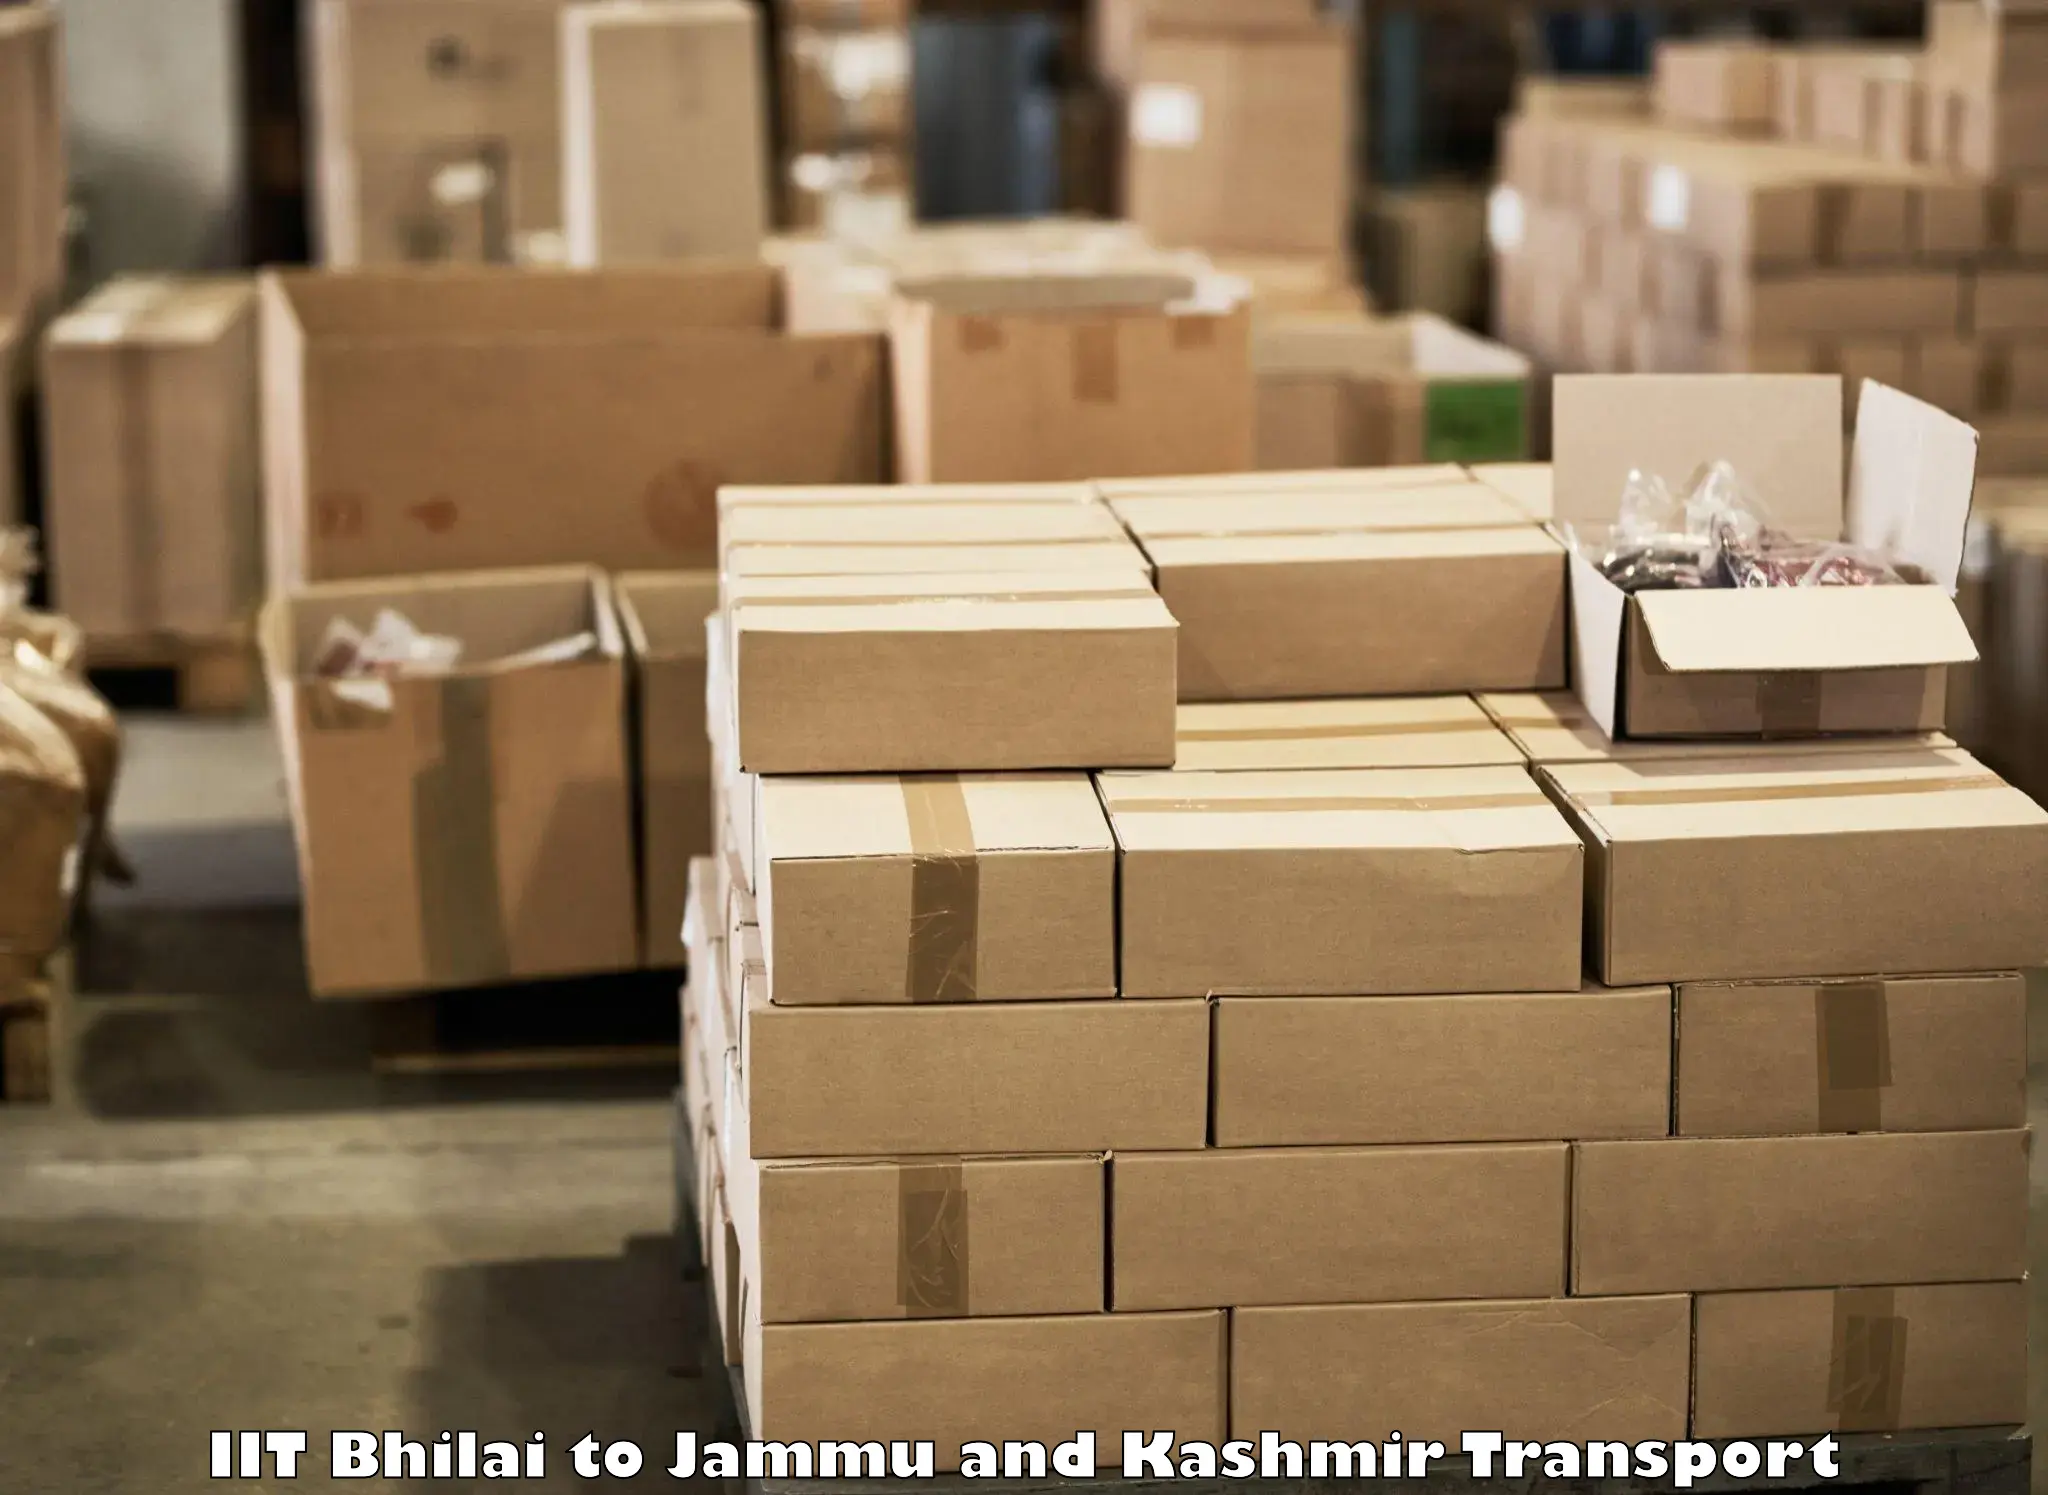 Daily parcel service transport in IIT Bhilai to Kulgam